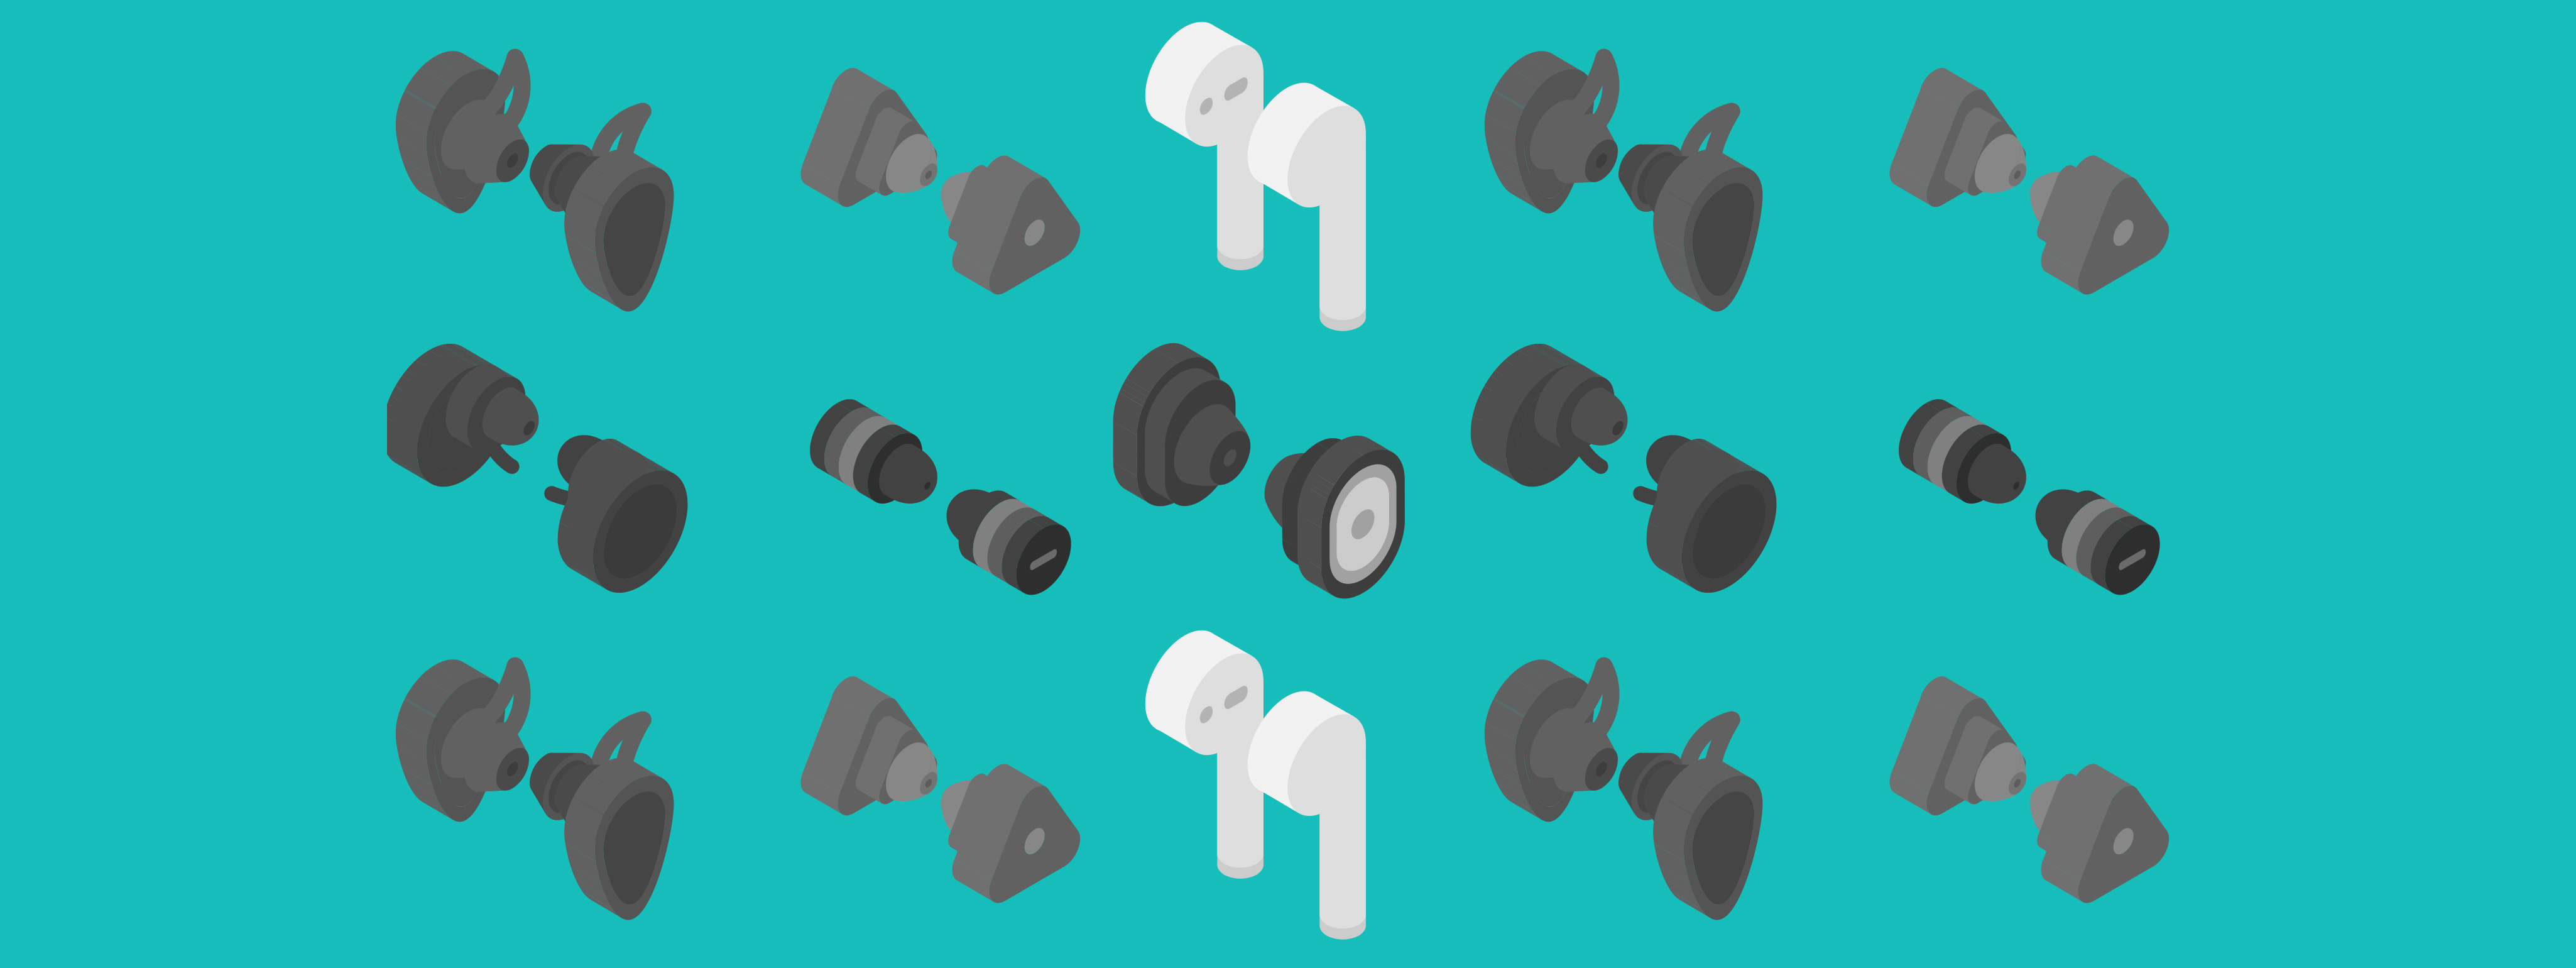 A pattern of various earbuds and headphones.